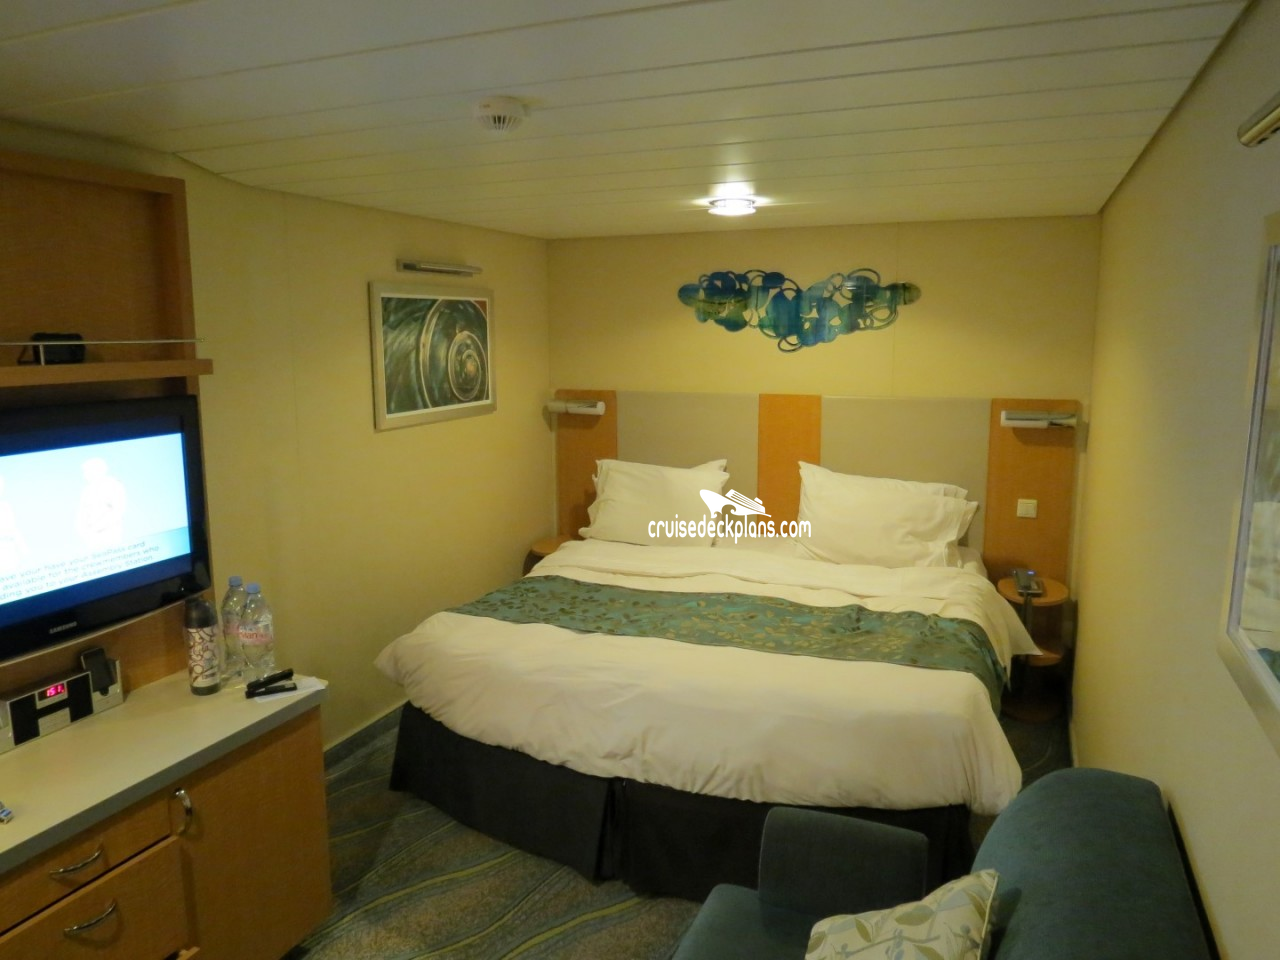 Allure Of The Seas Cabin 8543 Pictures